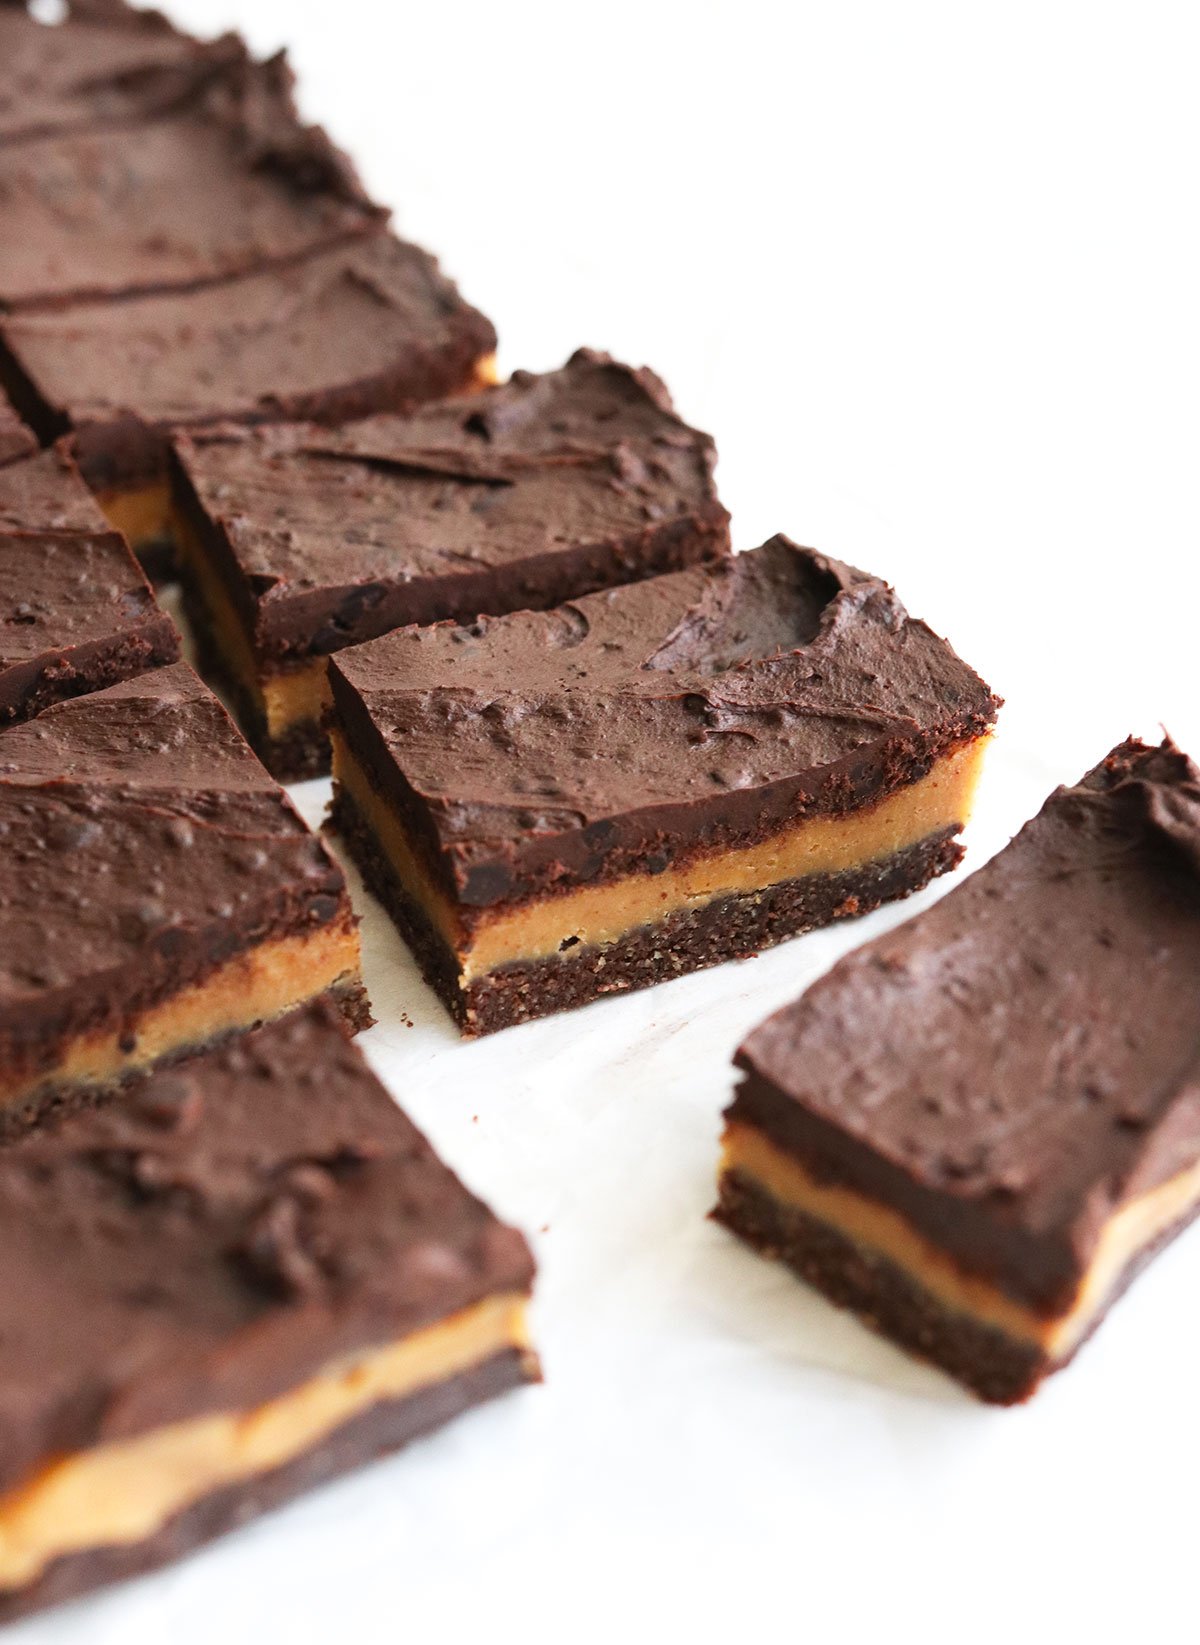 chocolate peanut butter bars sliced on white surface.